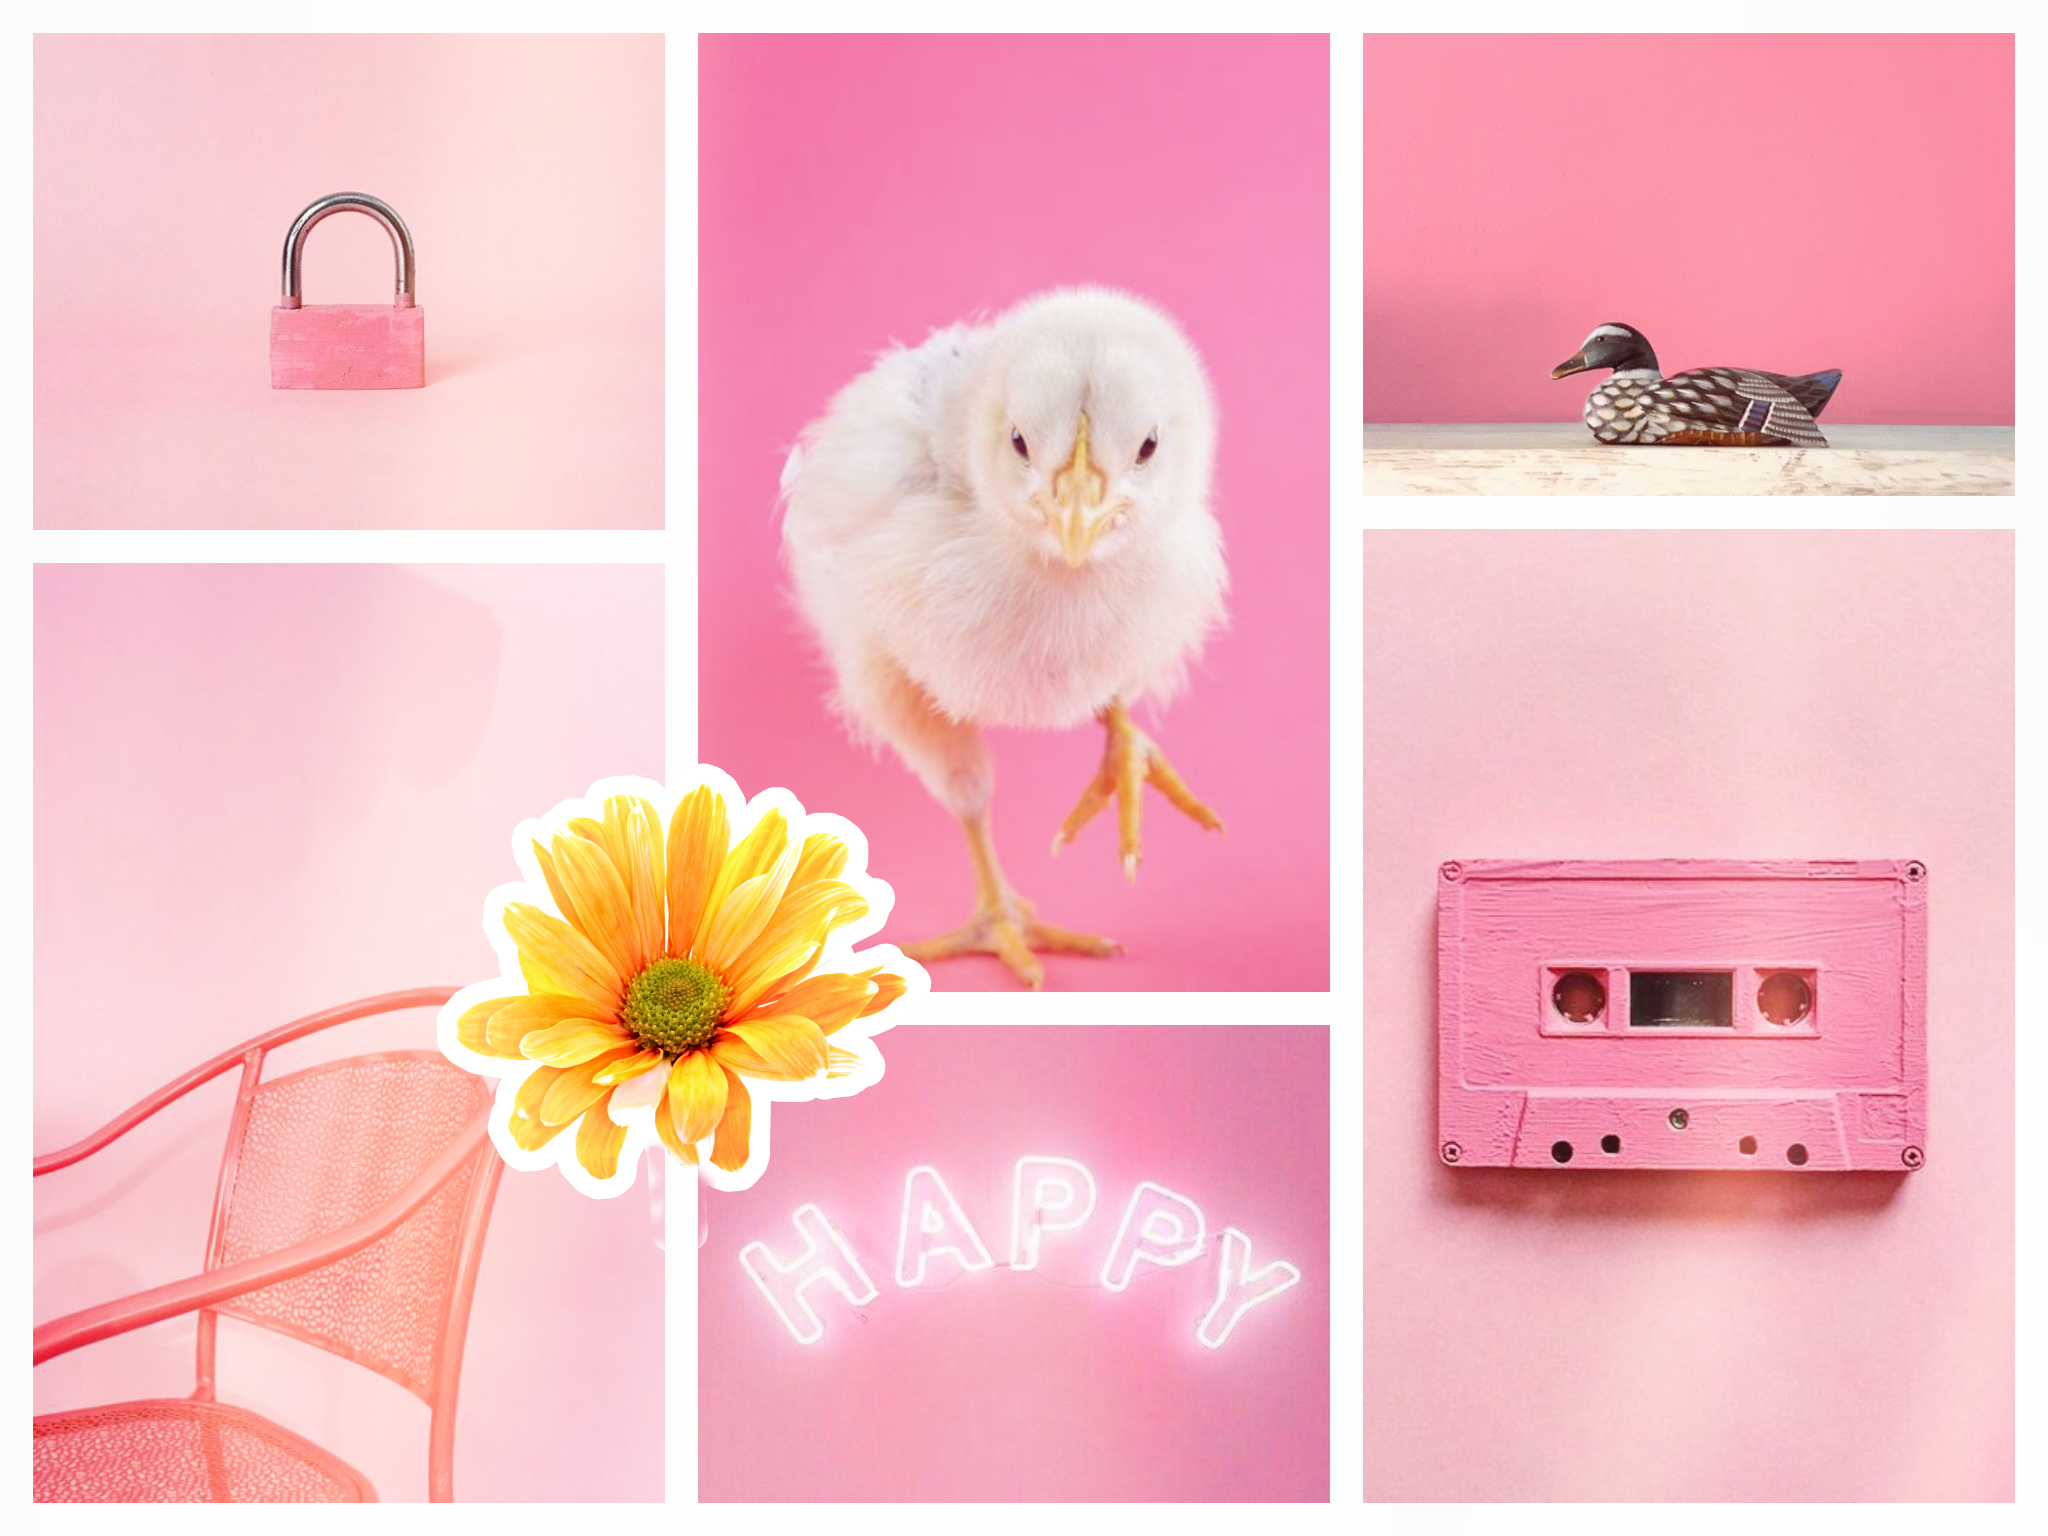 Aesthetic Pictures Pink And Yellow - Largest Wallpaper Portal